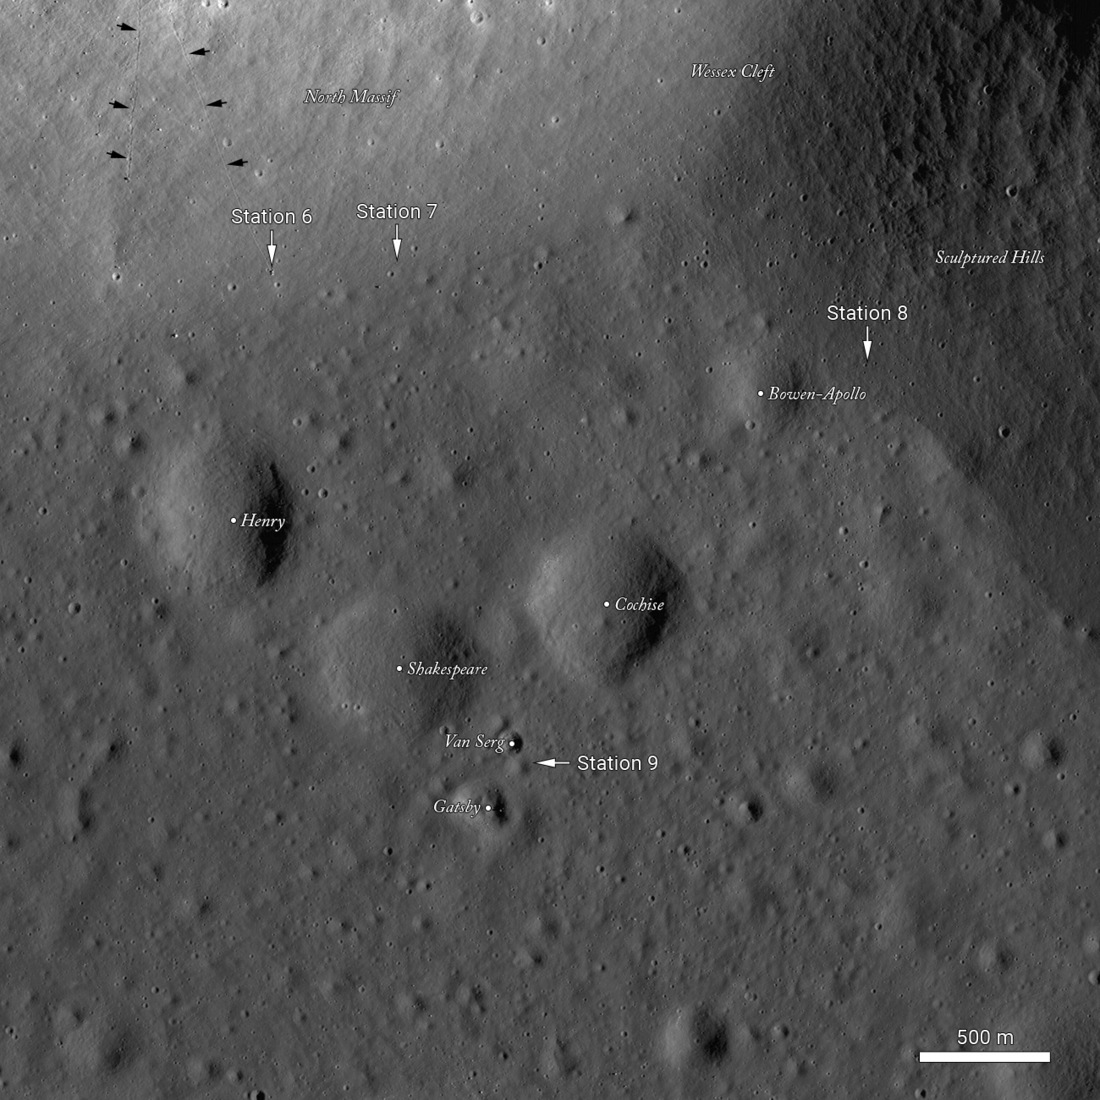 LROC NAC image M192753724 of the northeast Taurus-Littrow Valley showing Apollo 17 Stations 6, 7, 8, and 9 along the south slopes of the North Massif joining with the southwest slopes of the Sculptured Hills.